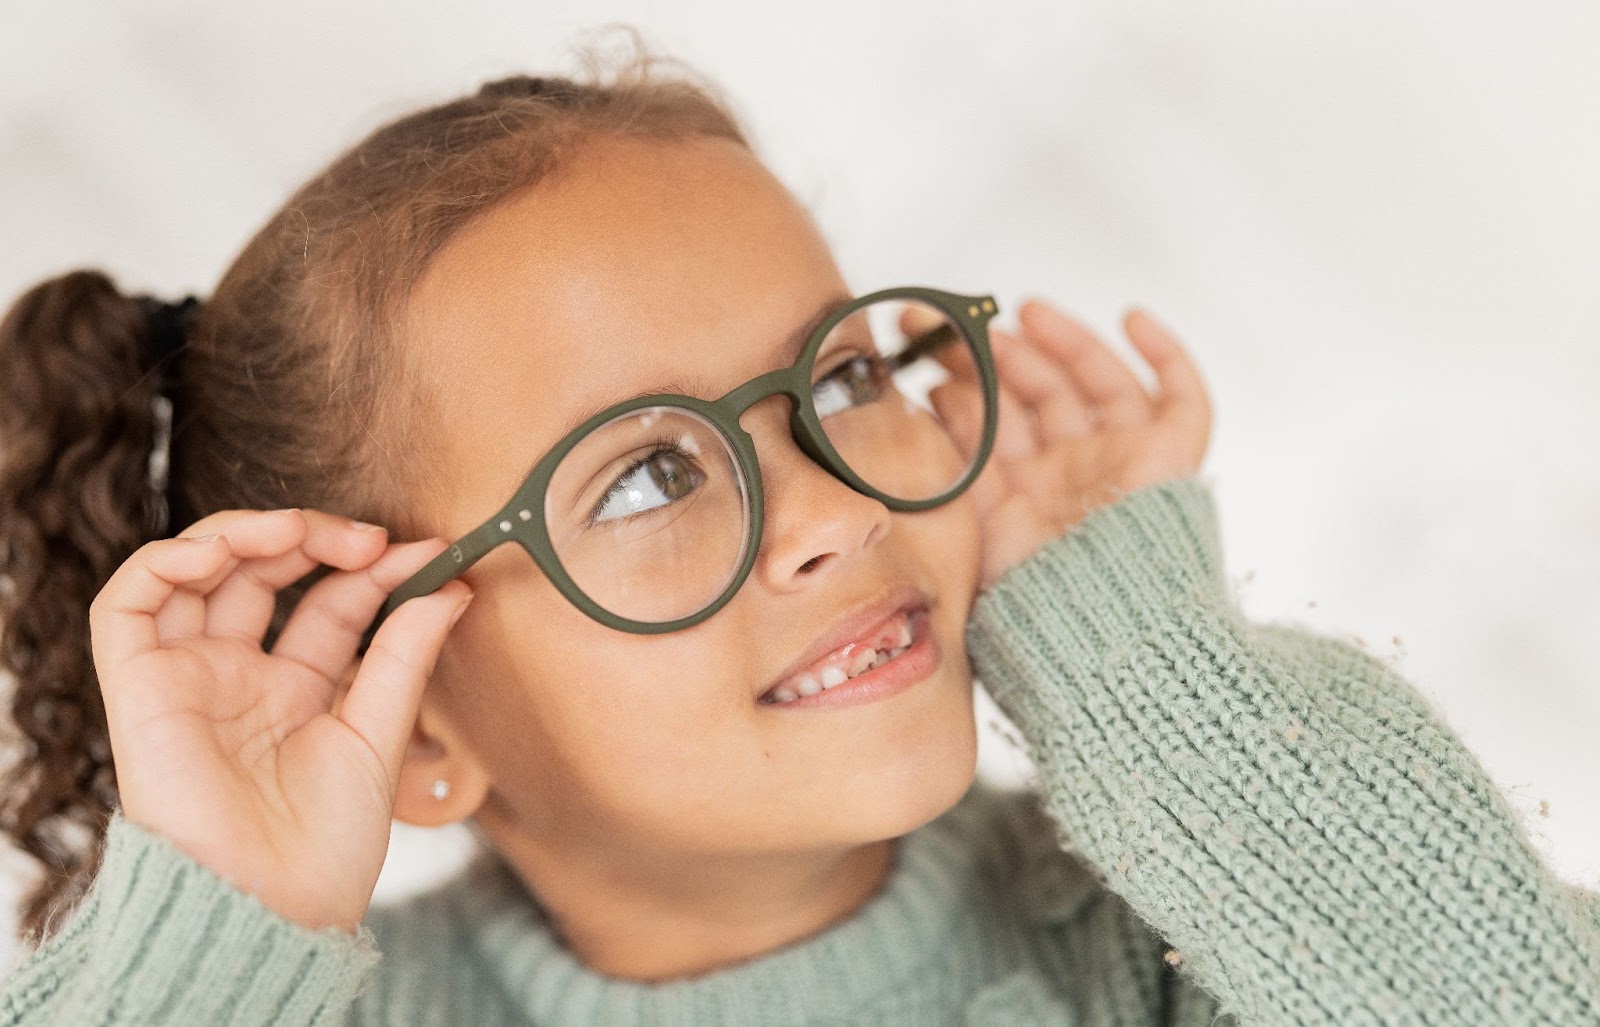 A child smiling while trying on a pair of eyeglasses.